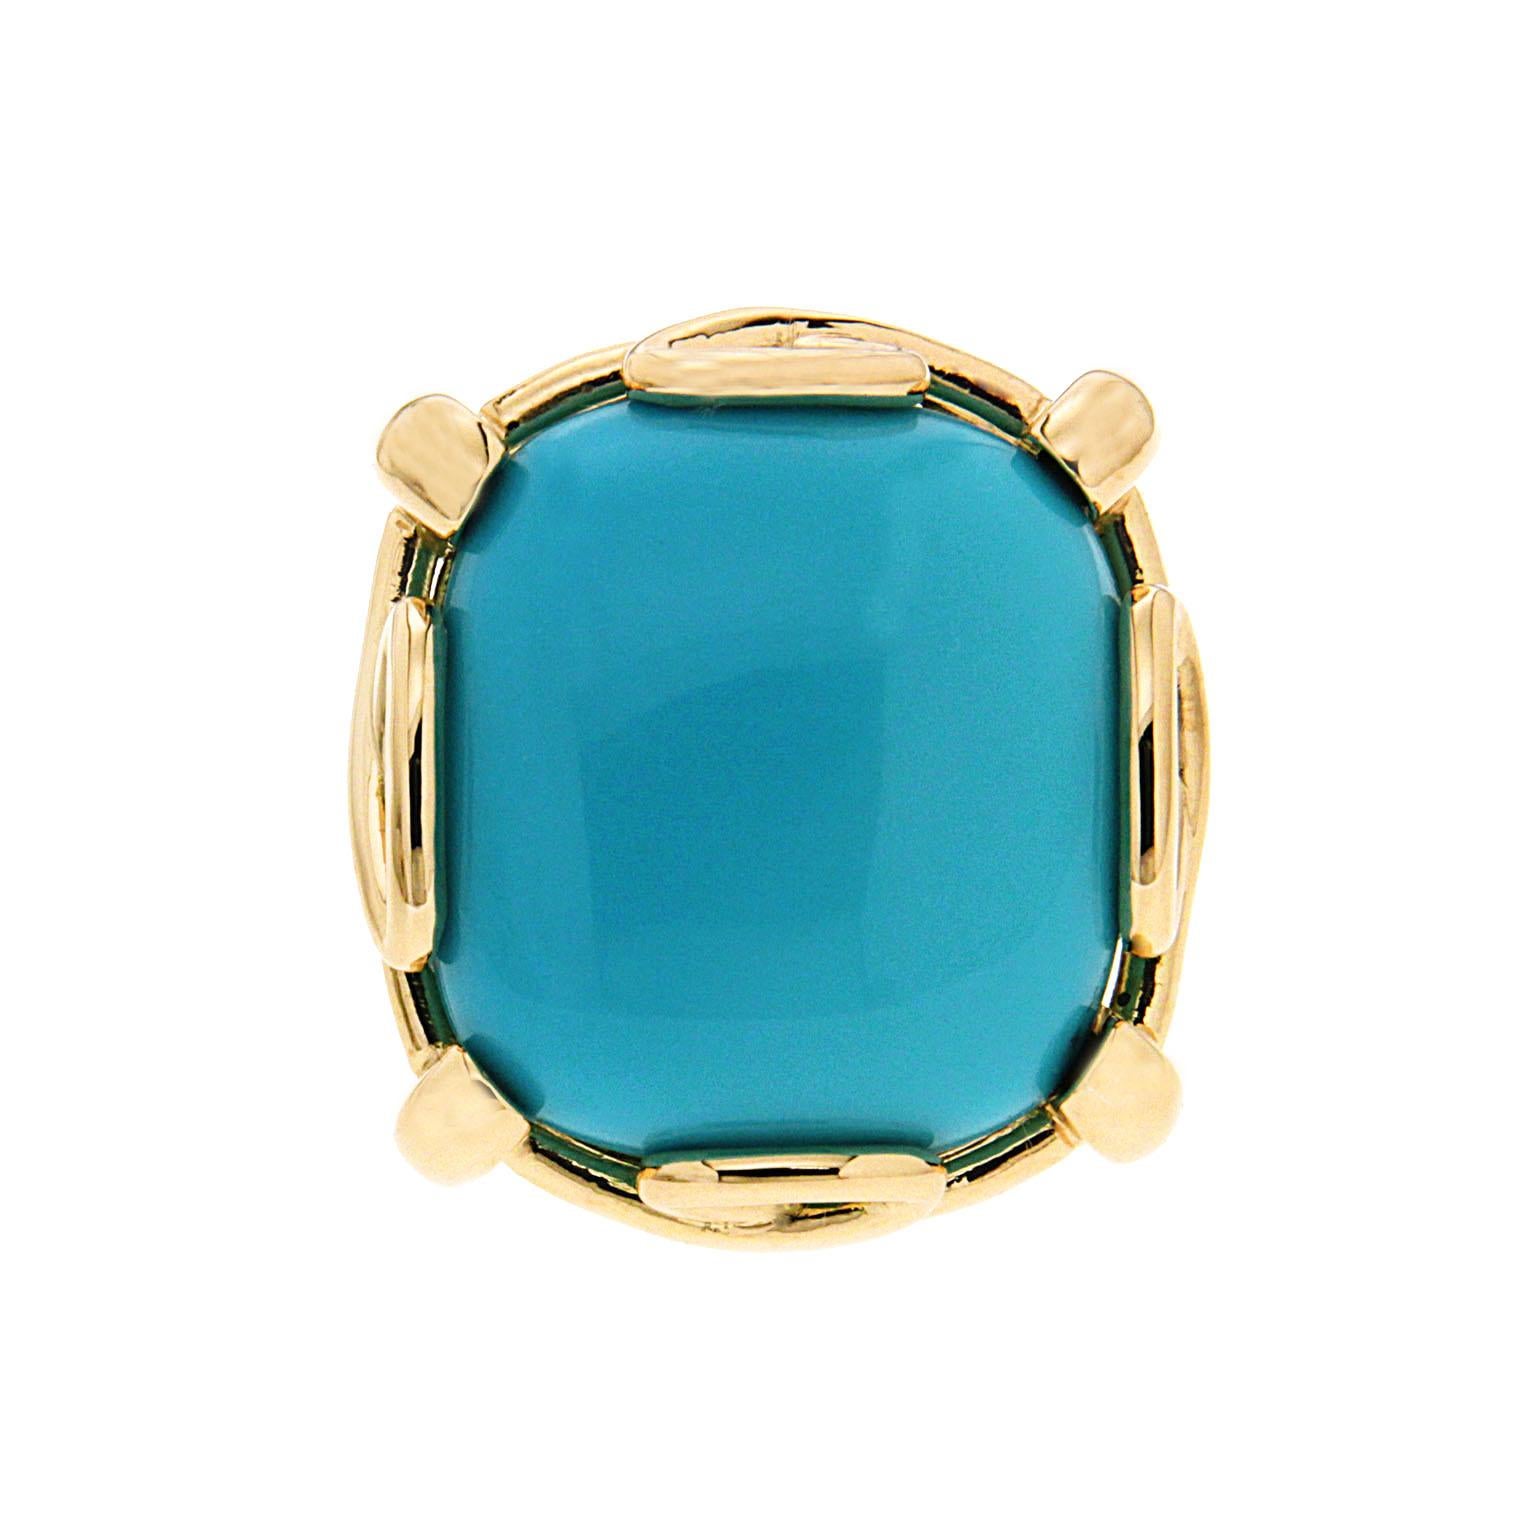 Valentin Magro Cushion Turquoise Cabochon Ring in Gold